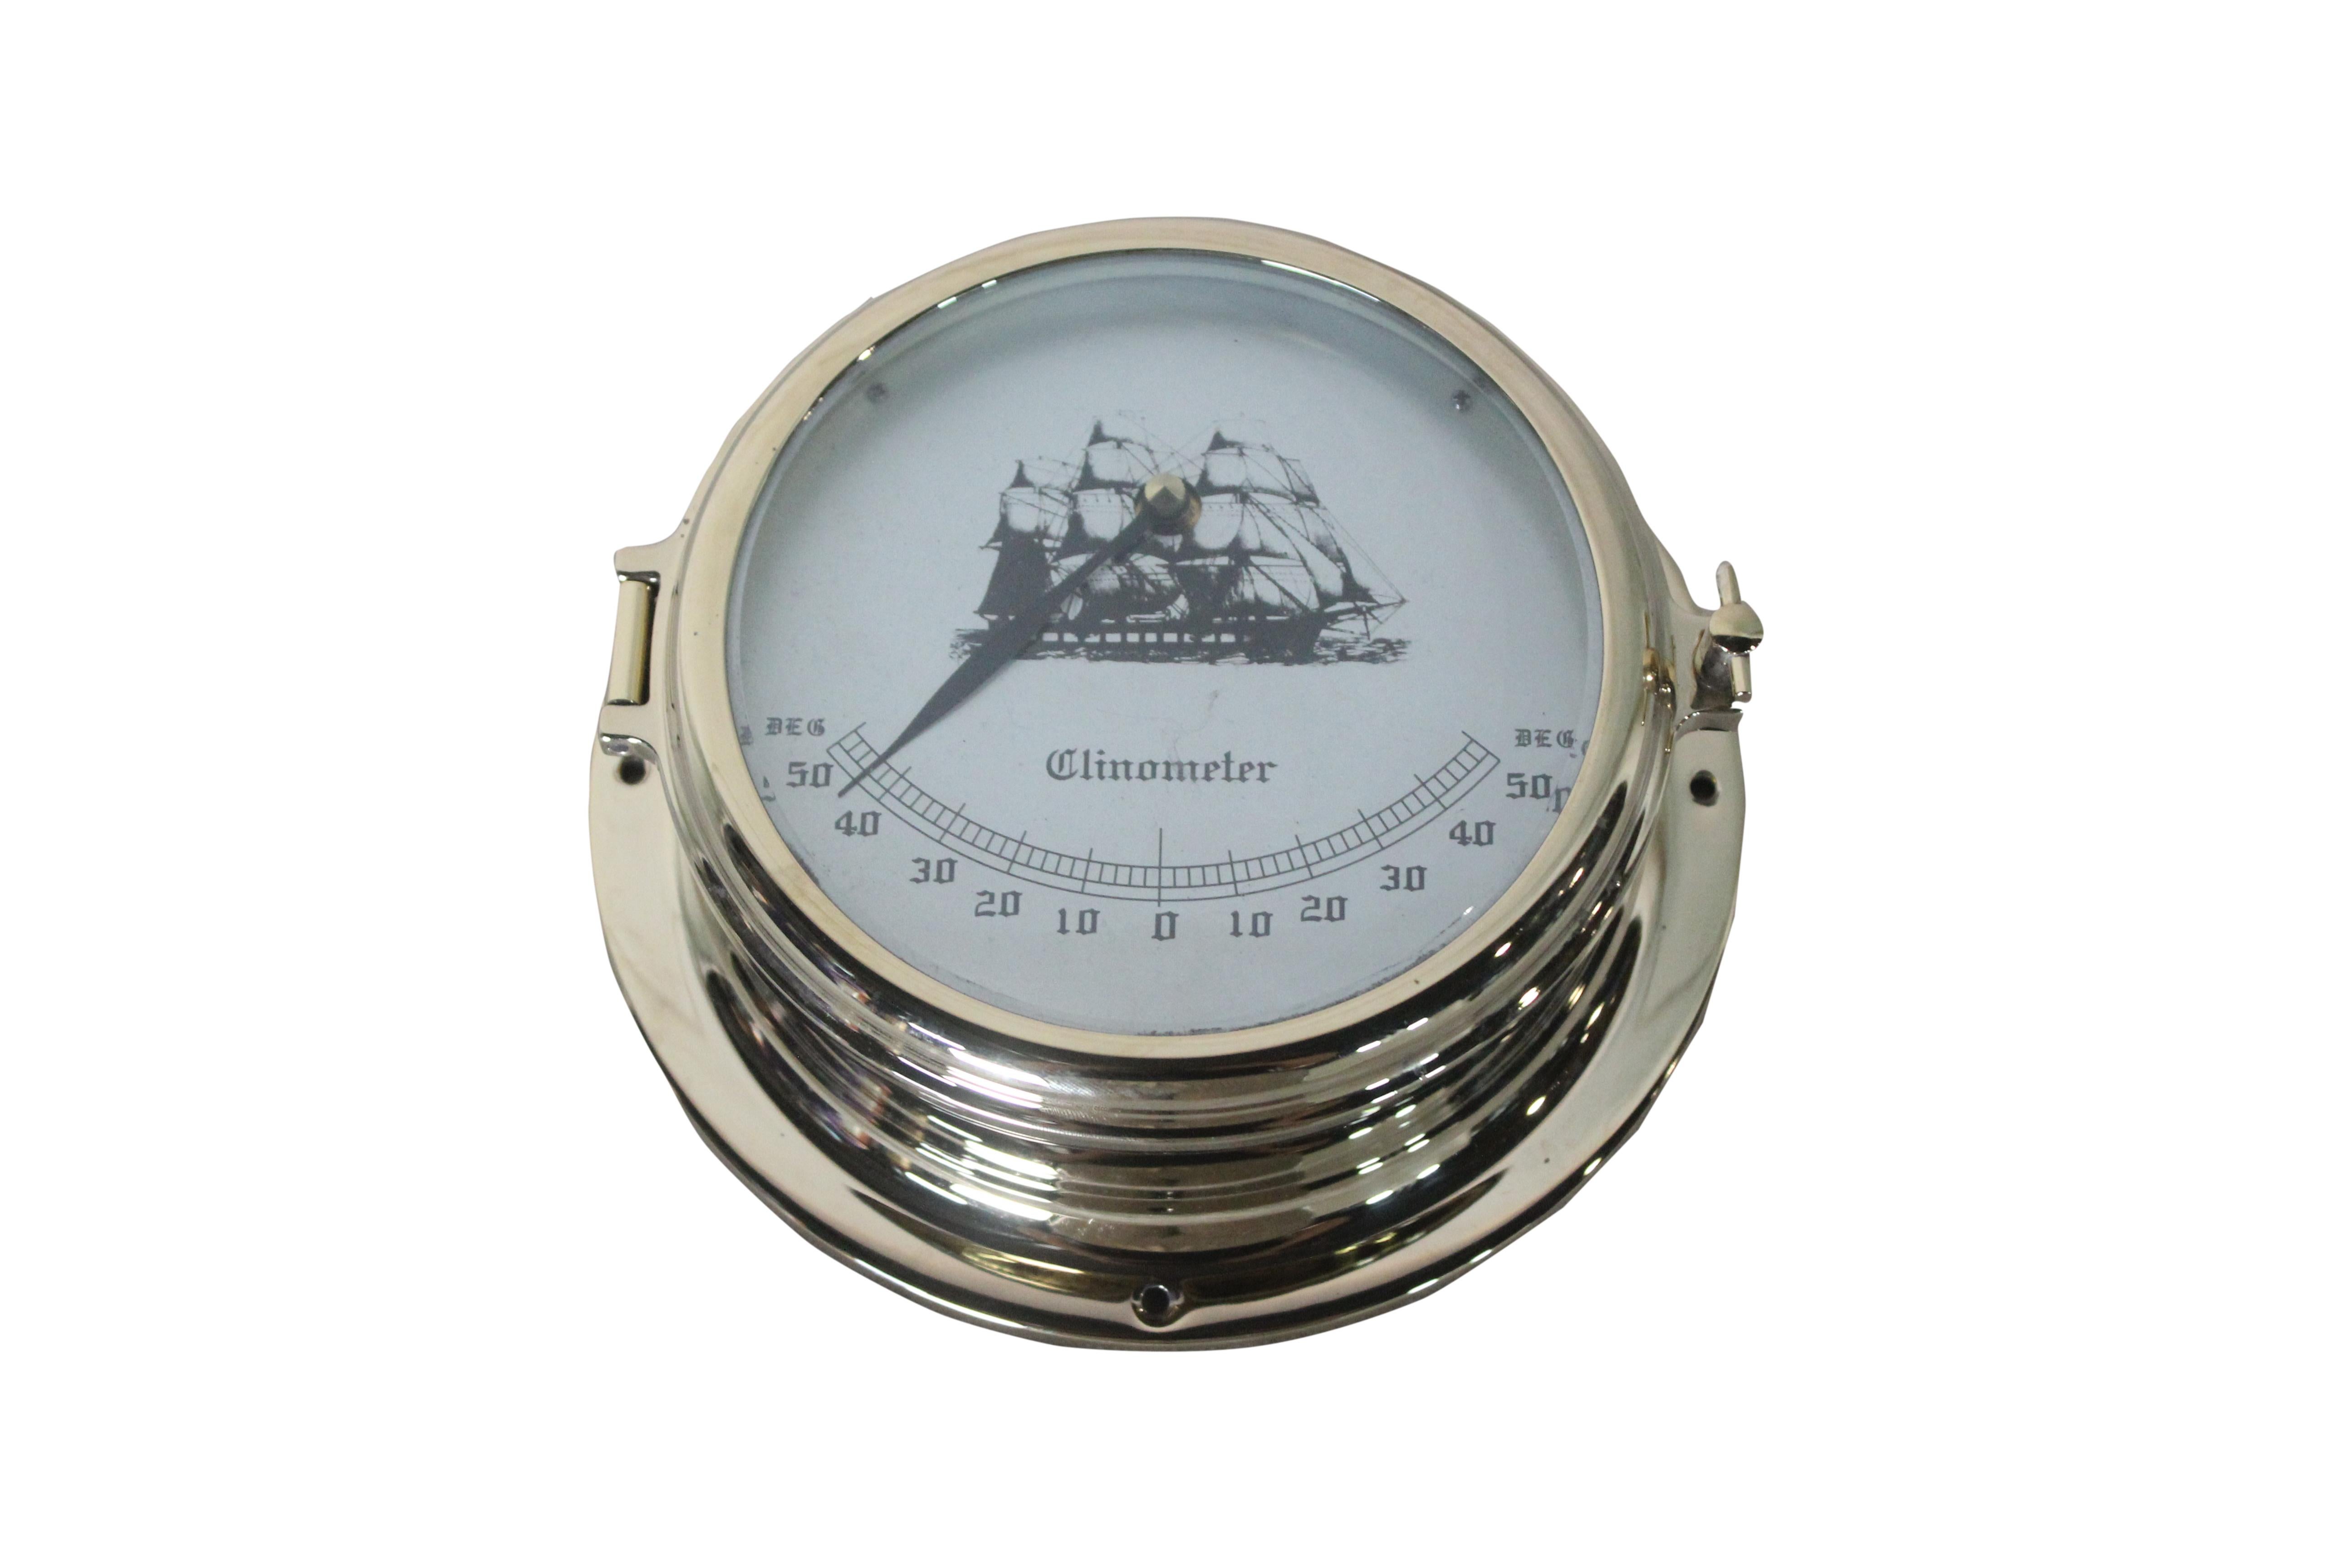 A brass Italian clinometer used on vessels to measure the degree of healing. In larger ship's, it would be used to balance cargo so that the ballast is even. By C.A.I.M, Genova. In working order. This one has a nice graphic of a clipper ship.